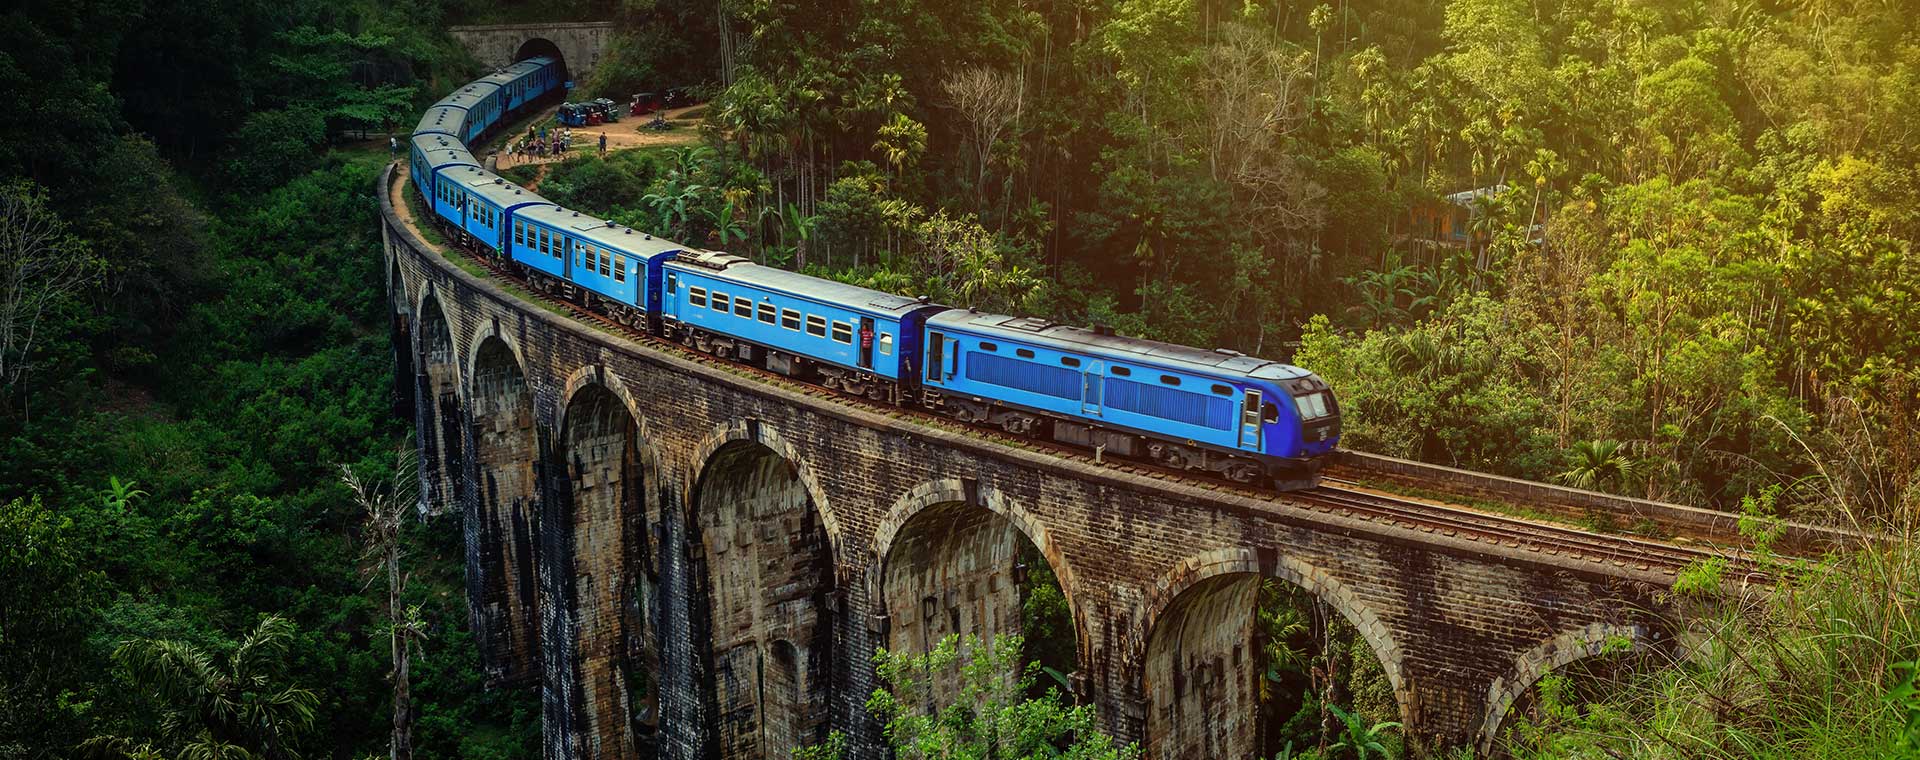 A blue train is crossing the Nine Arches Bridge, in Sri Lanka. The bridge is surrounded by lush green rainforest. There is soft, yellow sun light filtering through from the top right corner of the image.